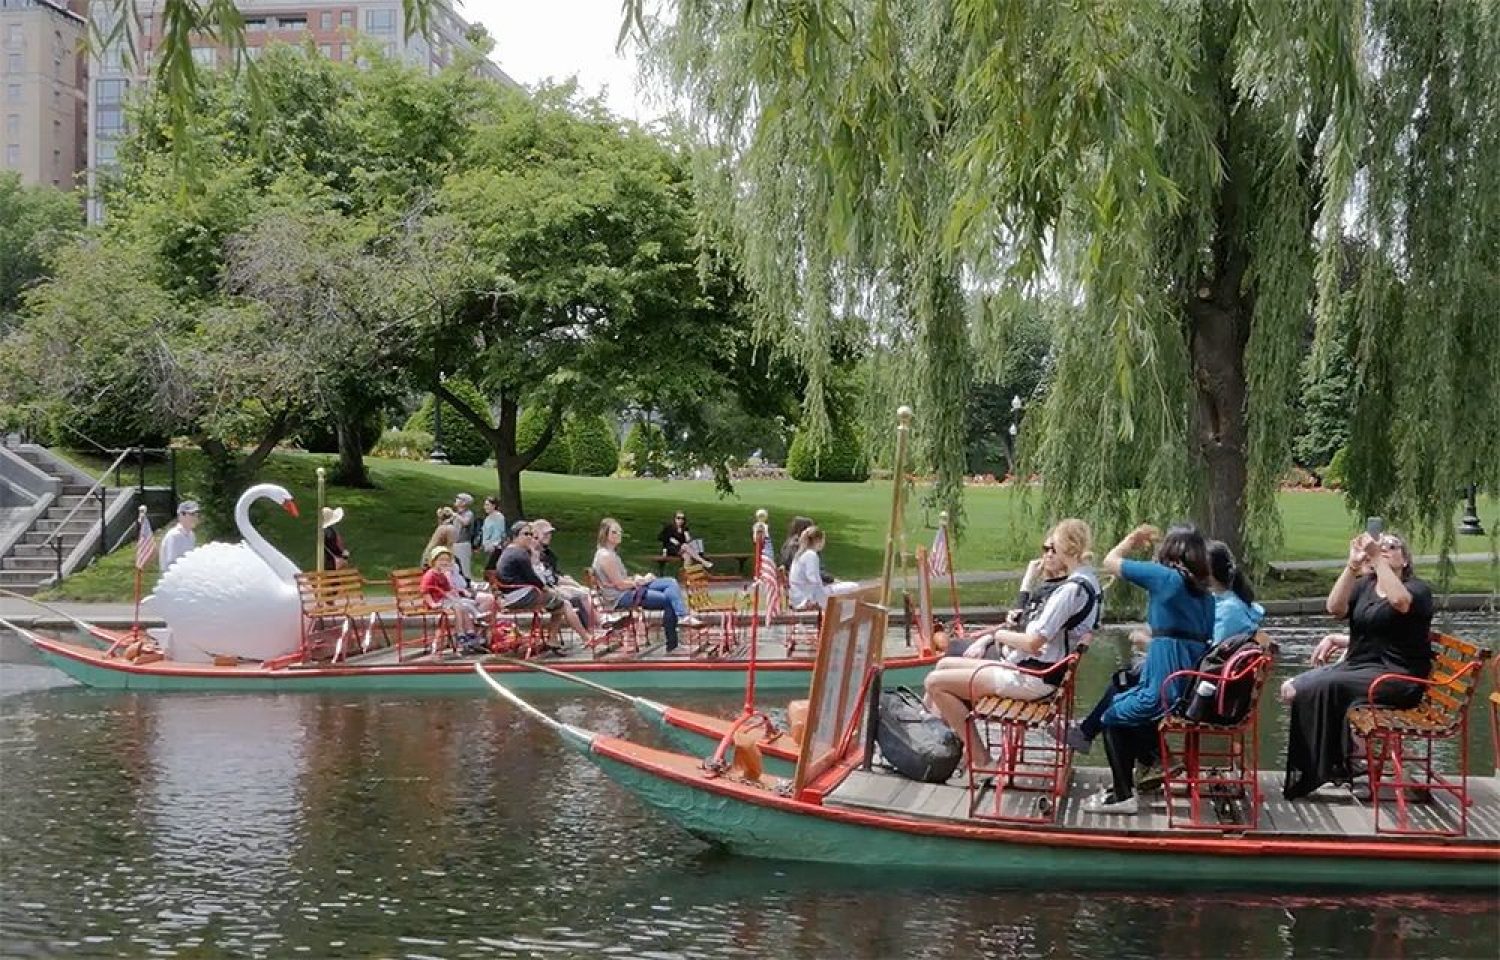 People riding the Swan Boats at Boston Public Garden